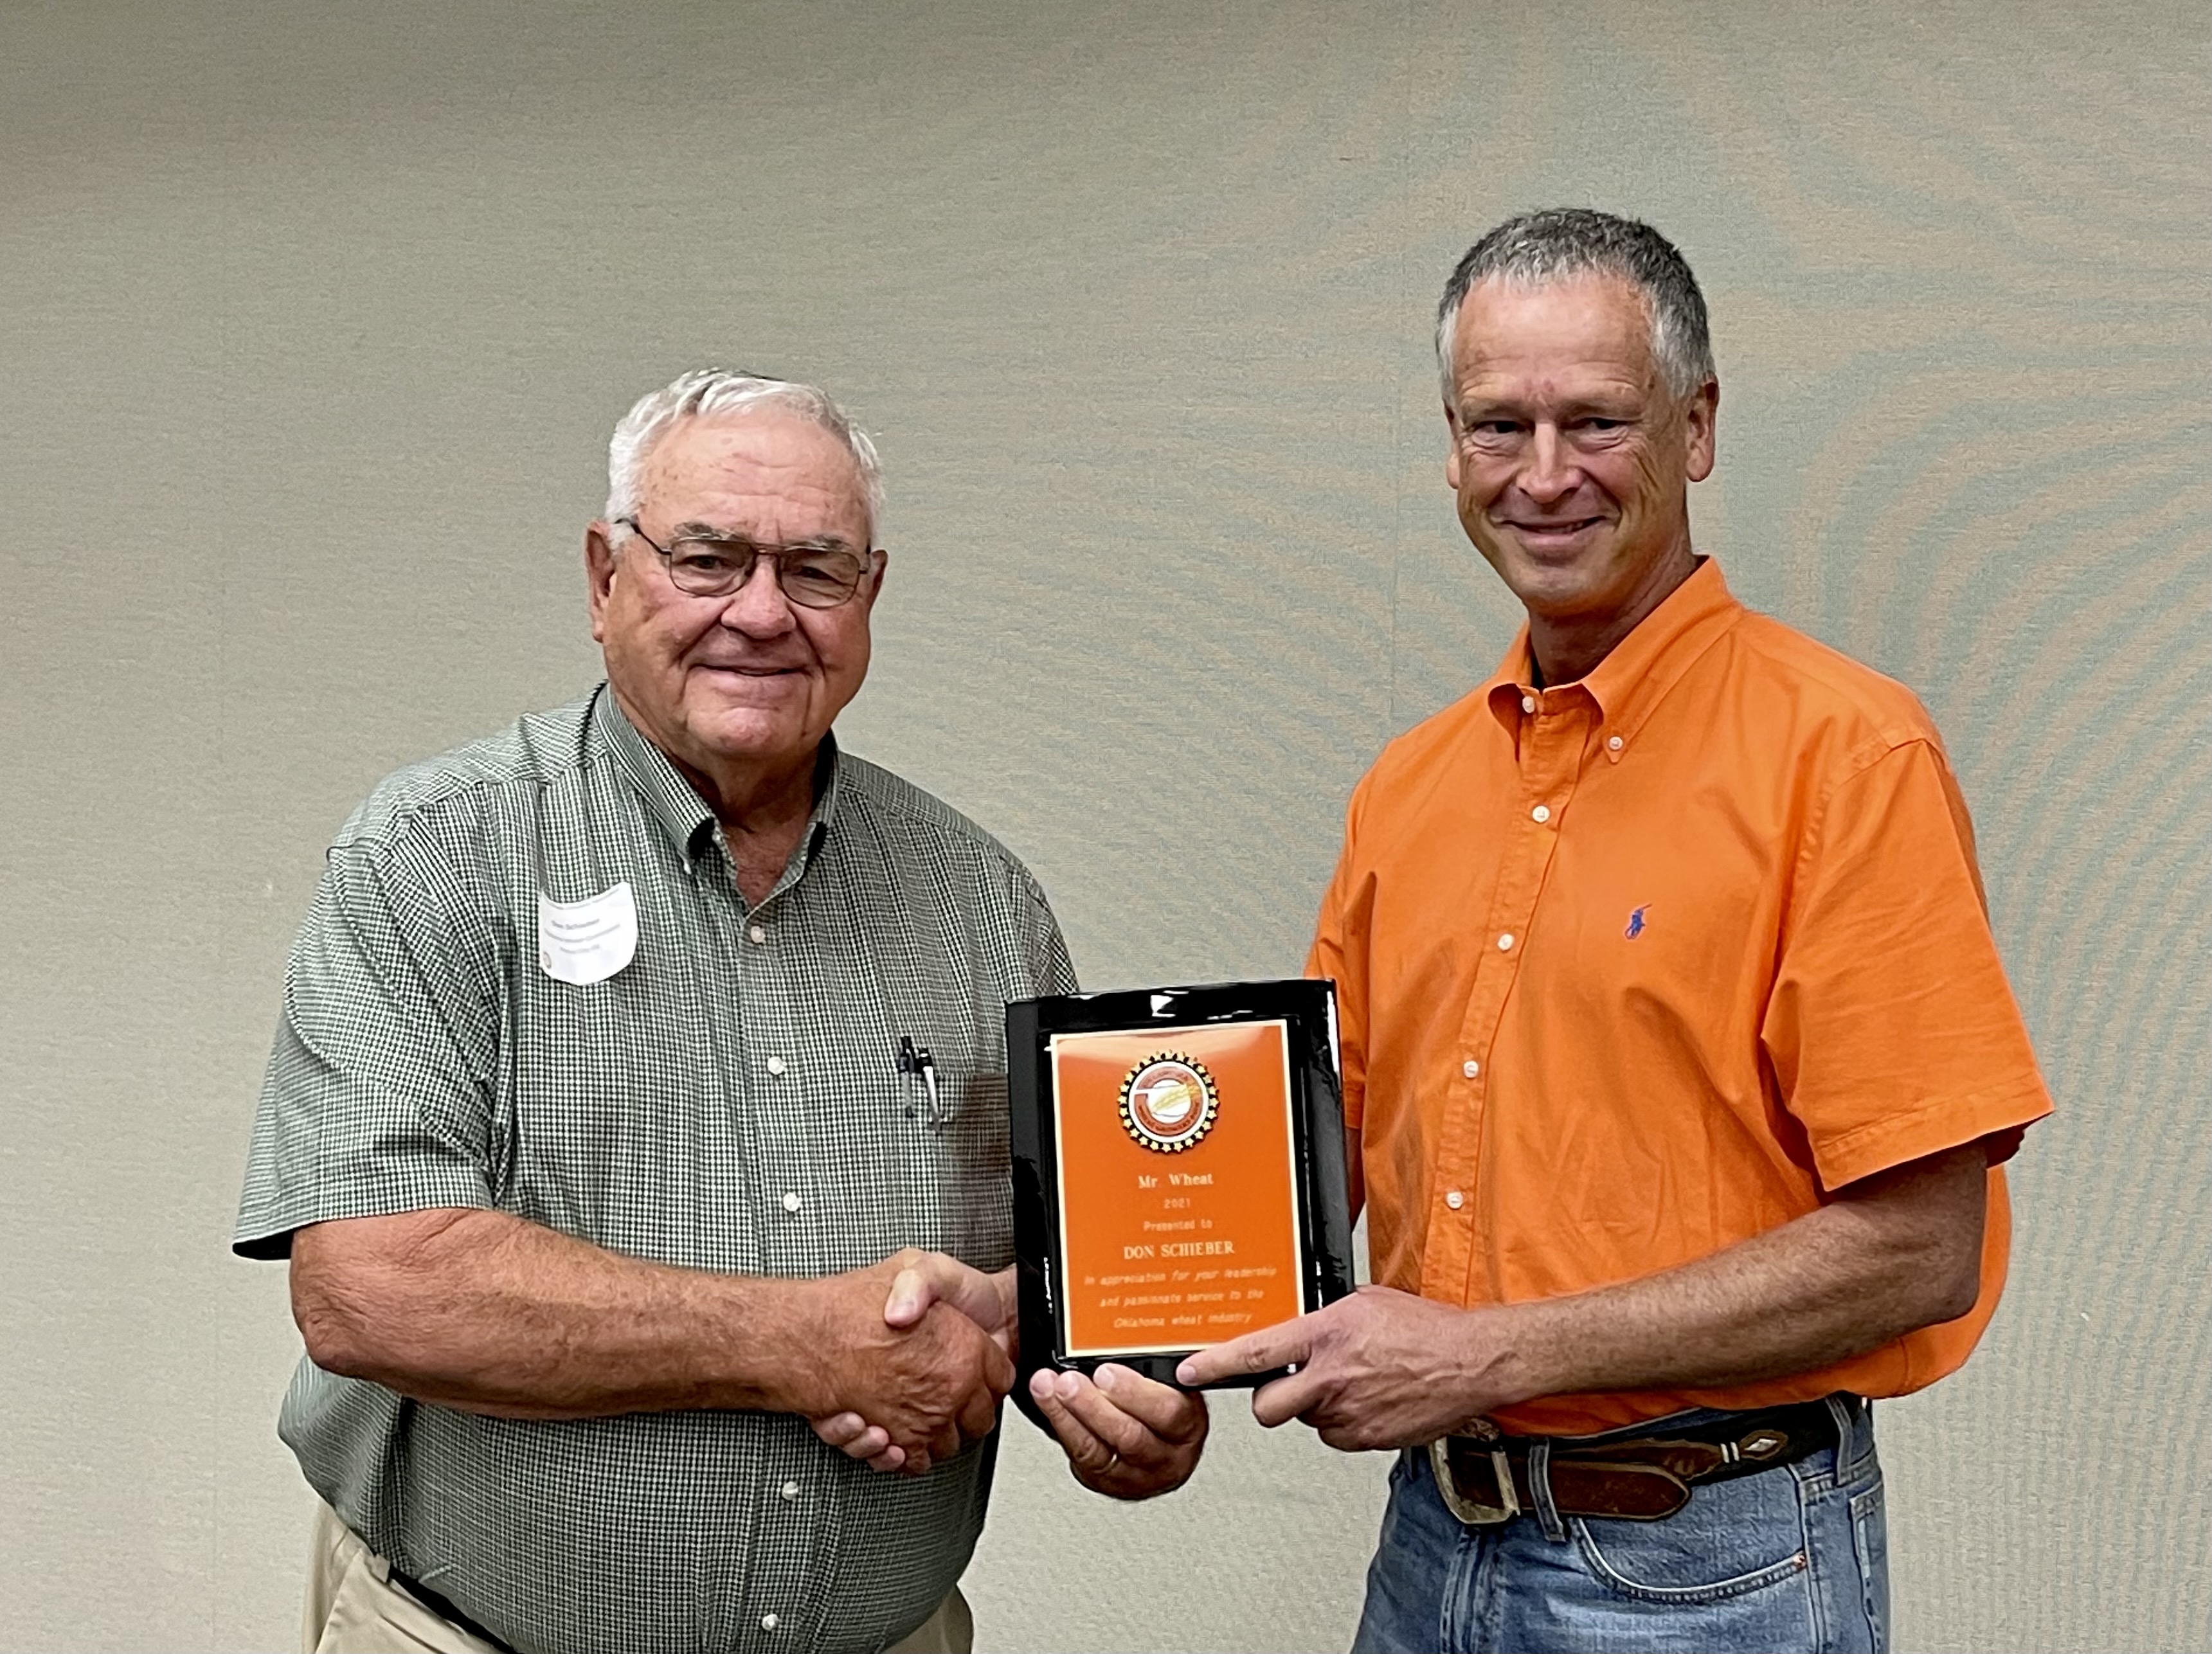 Oklahoma Wheat Growers and Wheat Commission Hand Out Awards at Annual Wheat Conference